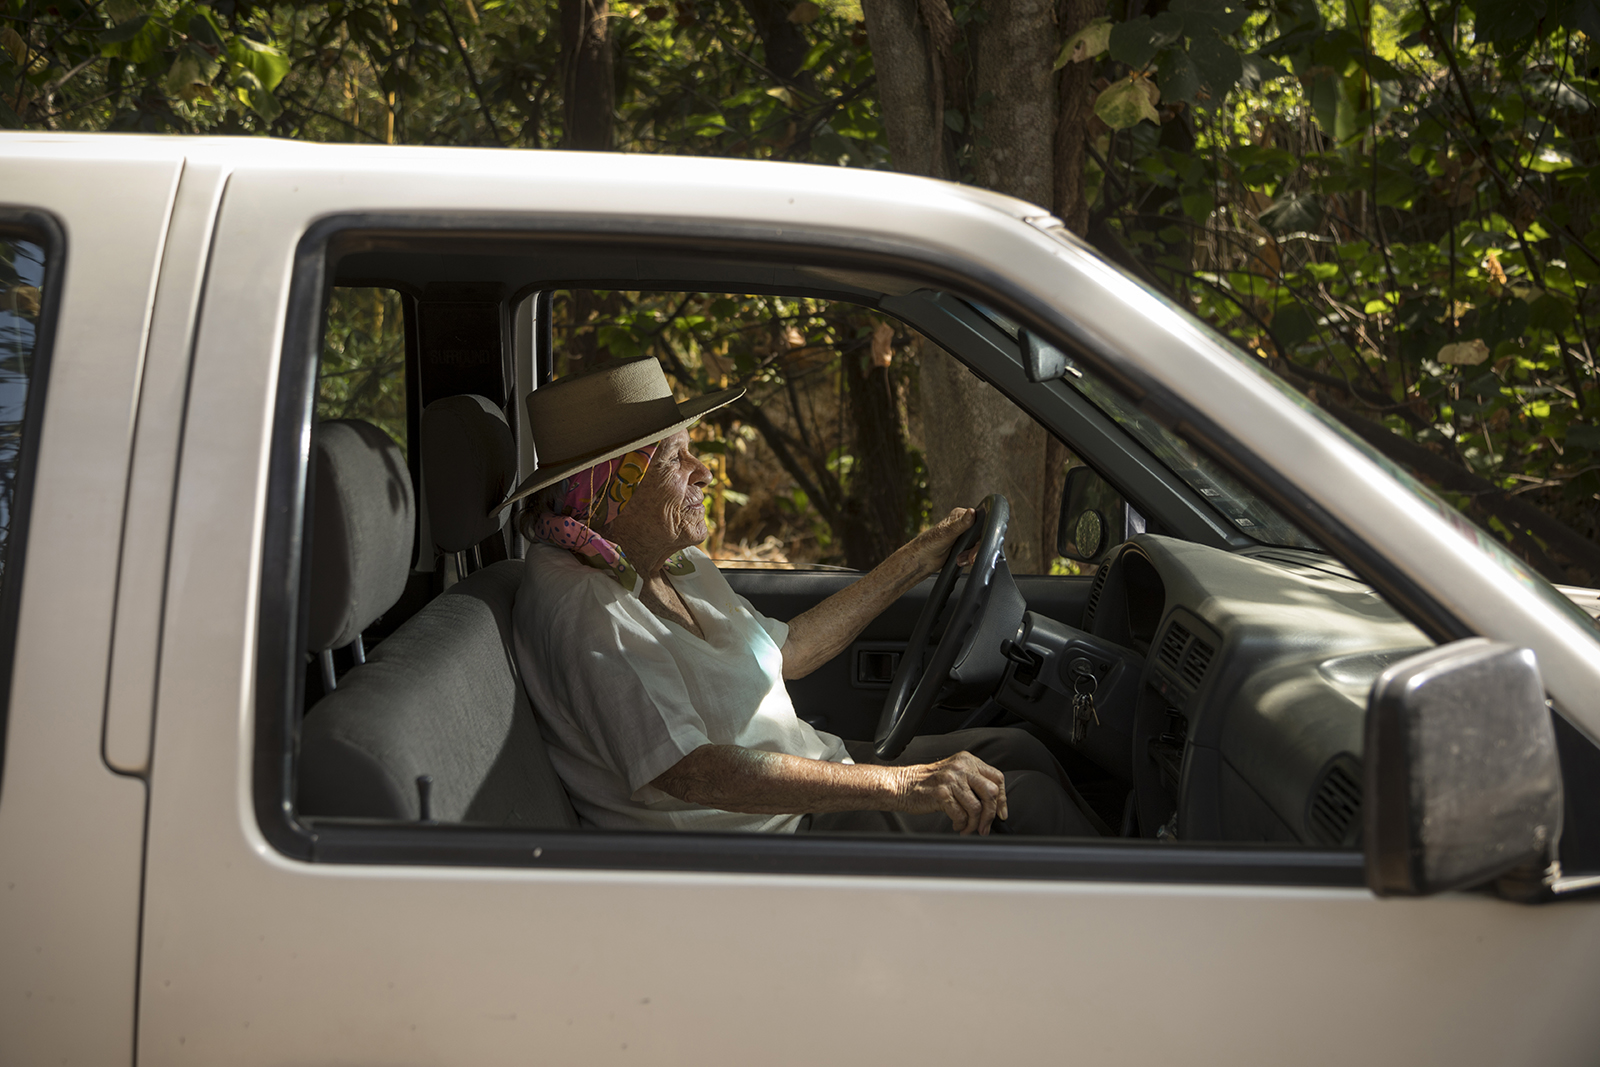 Diana Kennedy at the wheel of her then-17-year-old Nissan stick-shift pickup truck in 2018.